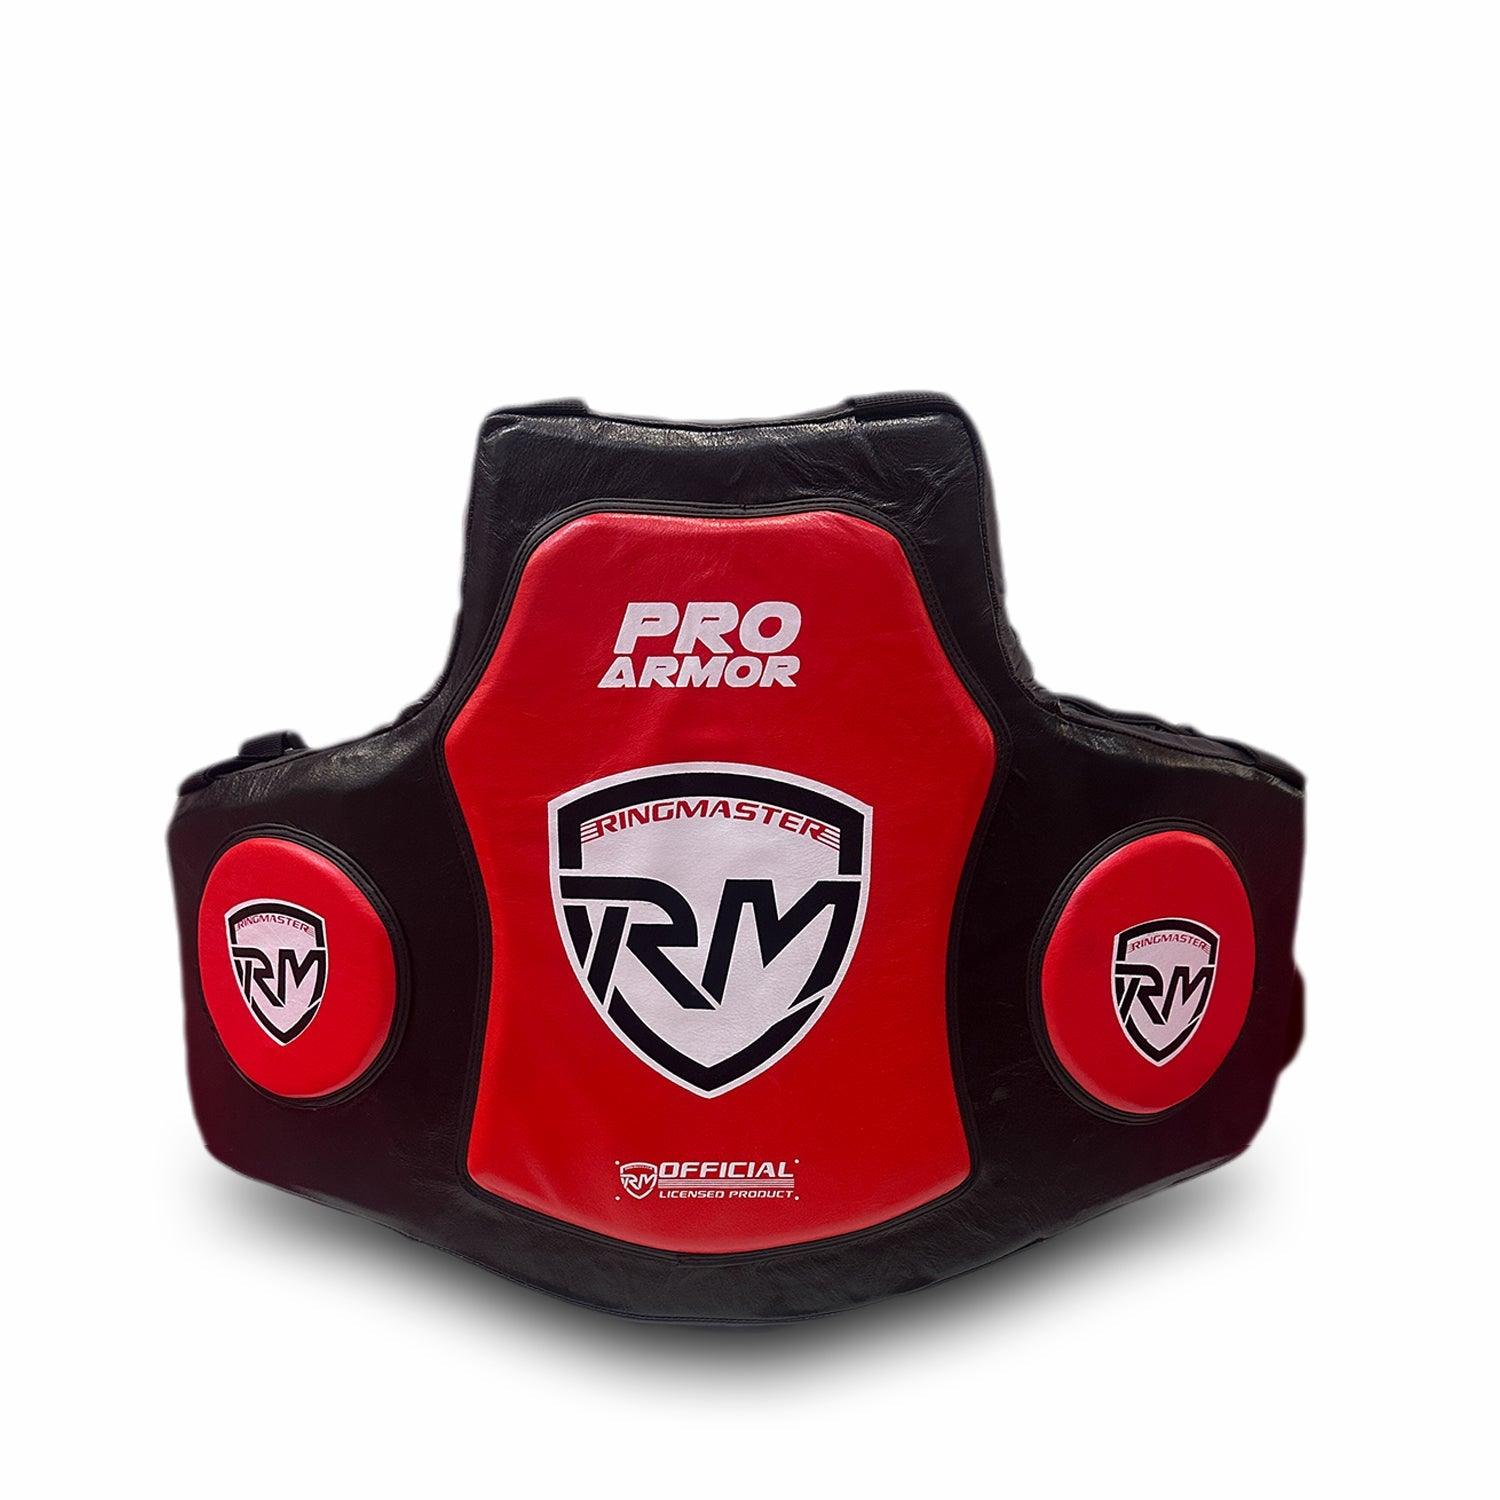 RingMaster Sports Pro Armor Series Body Protectors Synthetic Leather One Size Black and Red - RINGMASTER SPORTS - Made For Champions